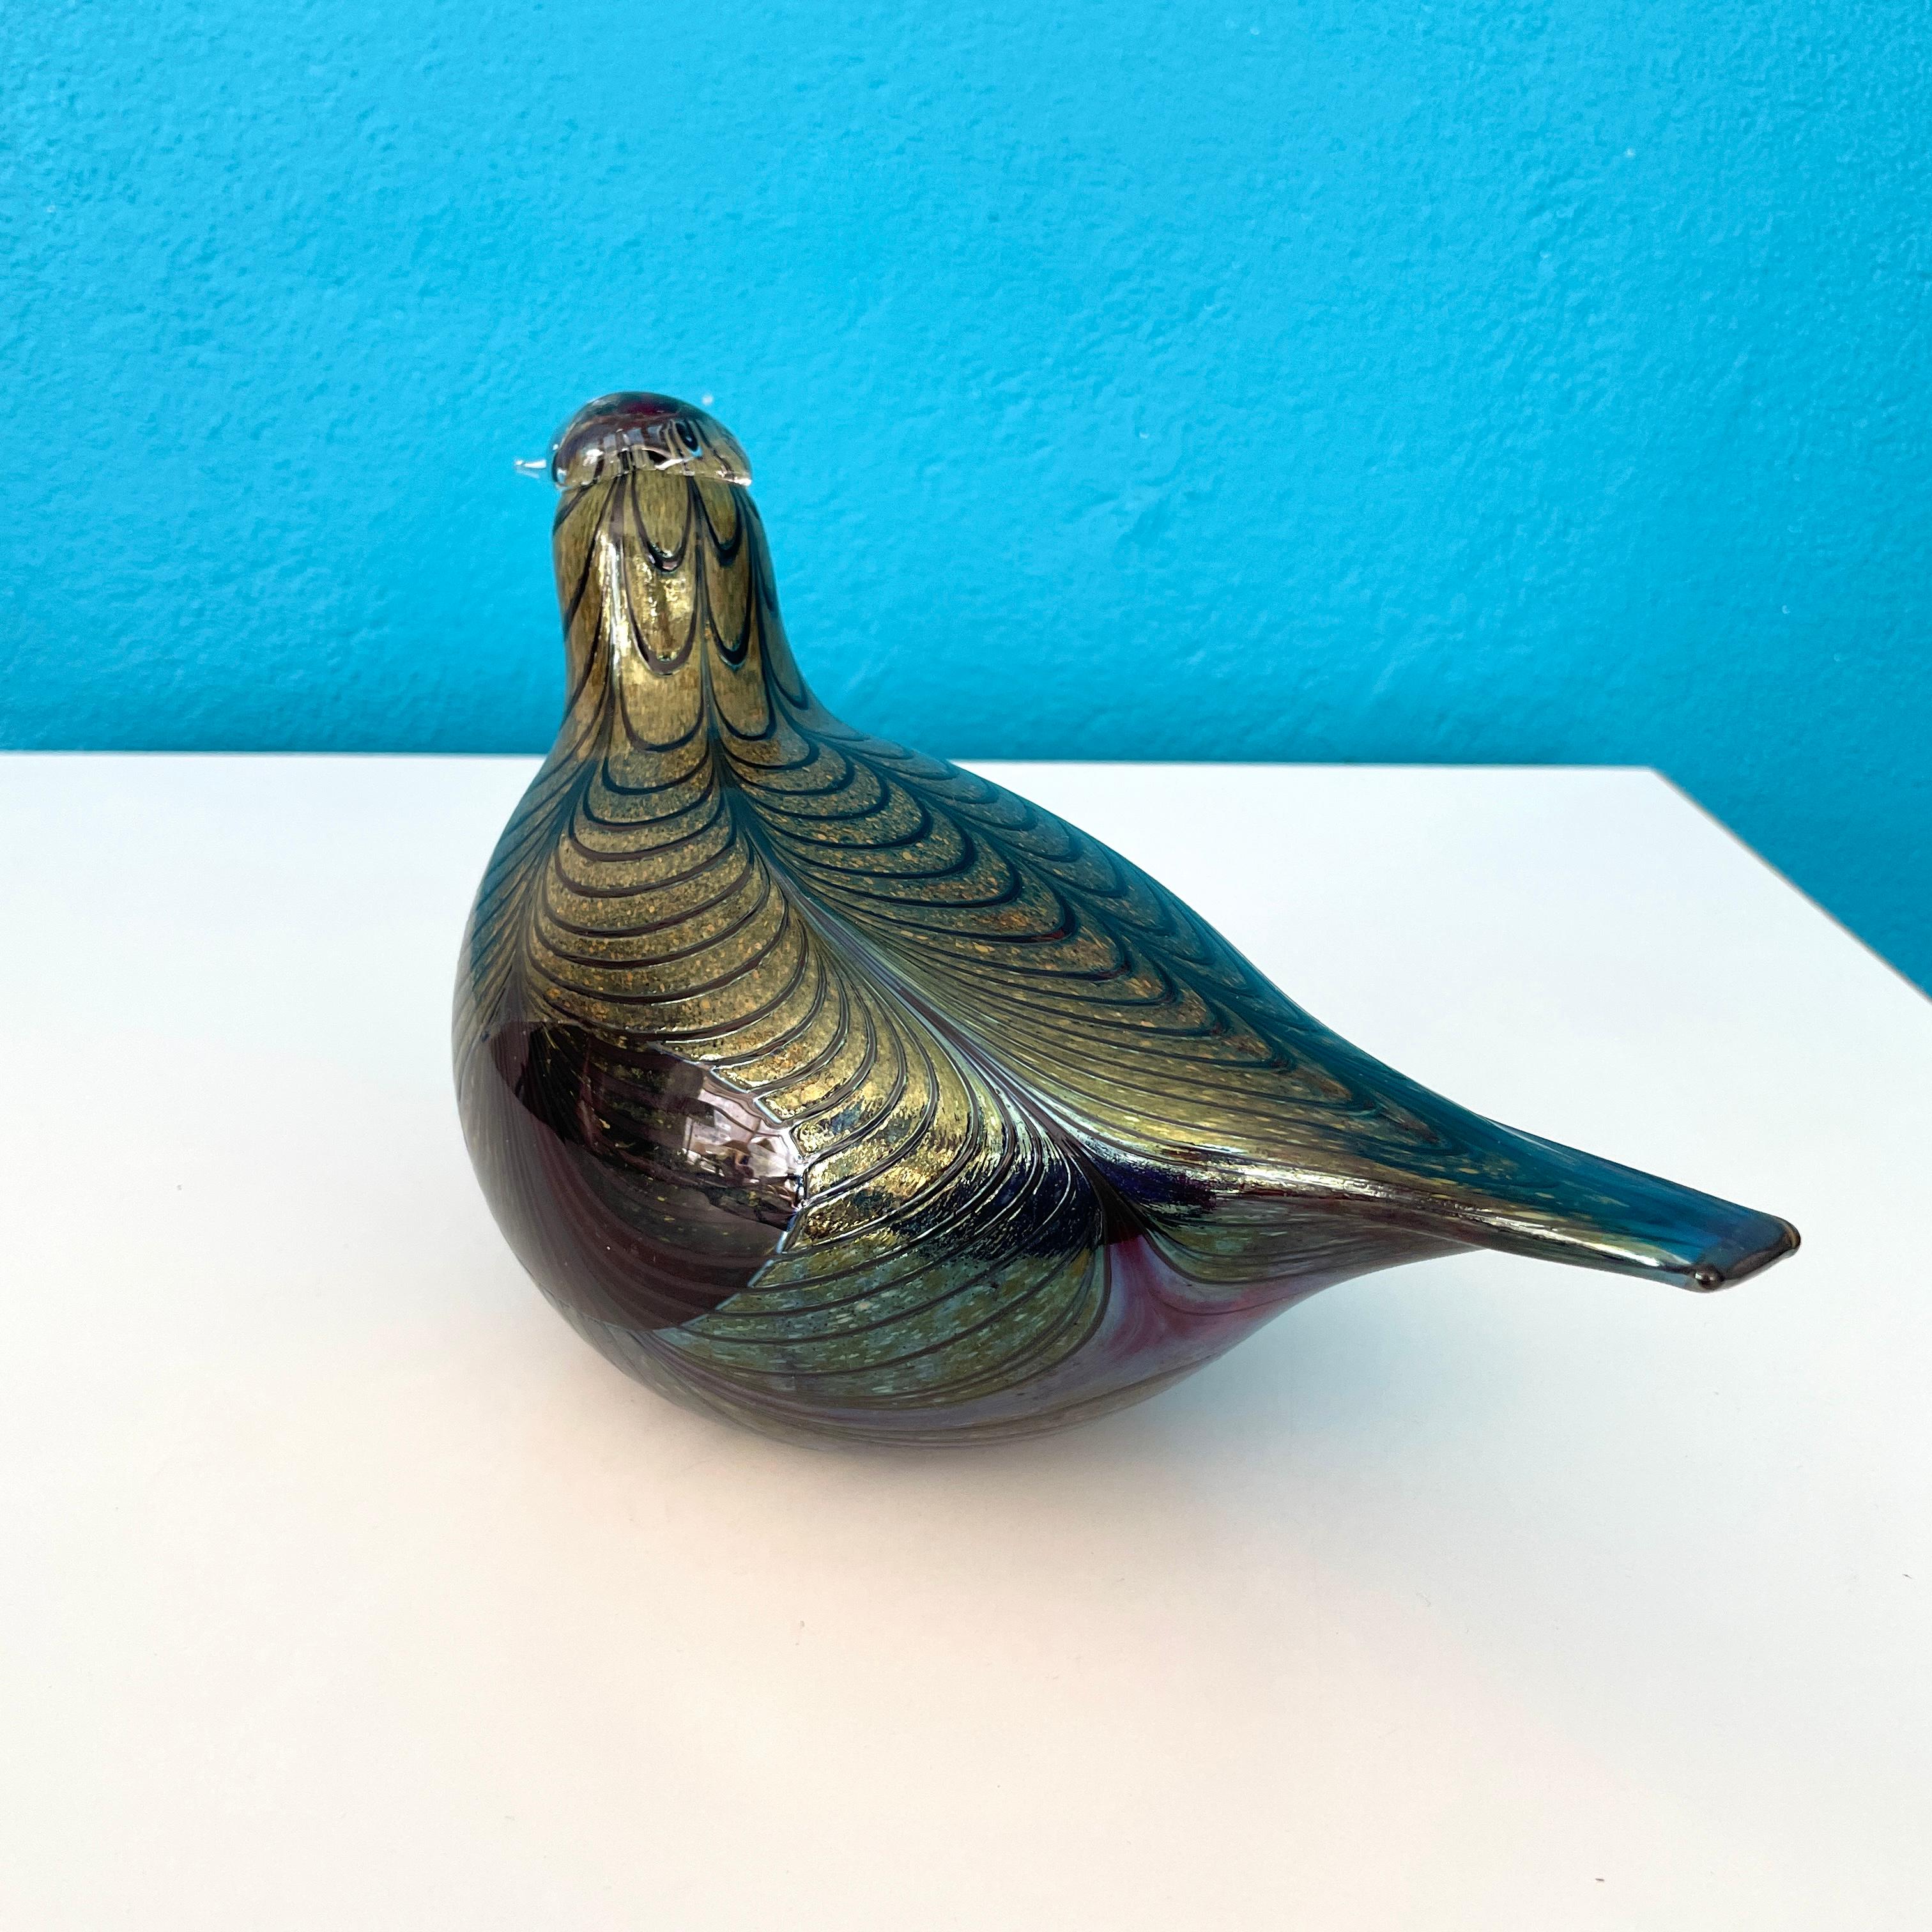 Big Art Glass Bird Designed by Oiva Tikka for Iittala Finland. 

Dimensions: 
Length 26cm / 10.20in
Height 18cm / 7in
Width 13cm / 5.1in

Signed 